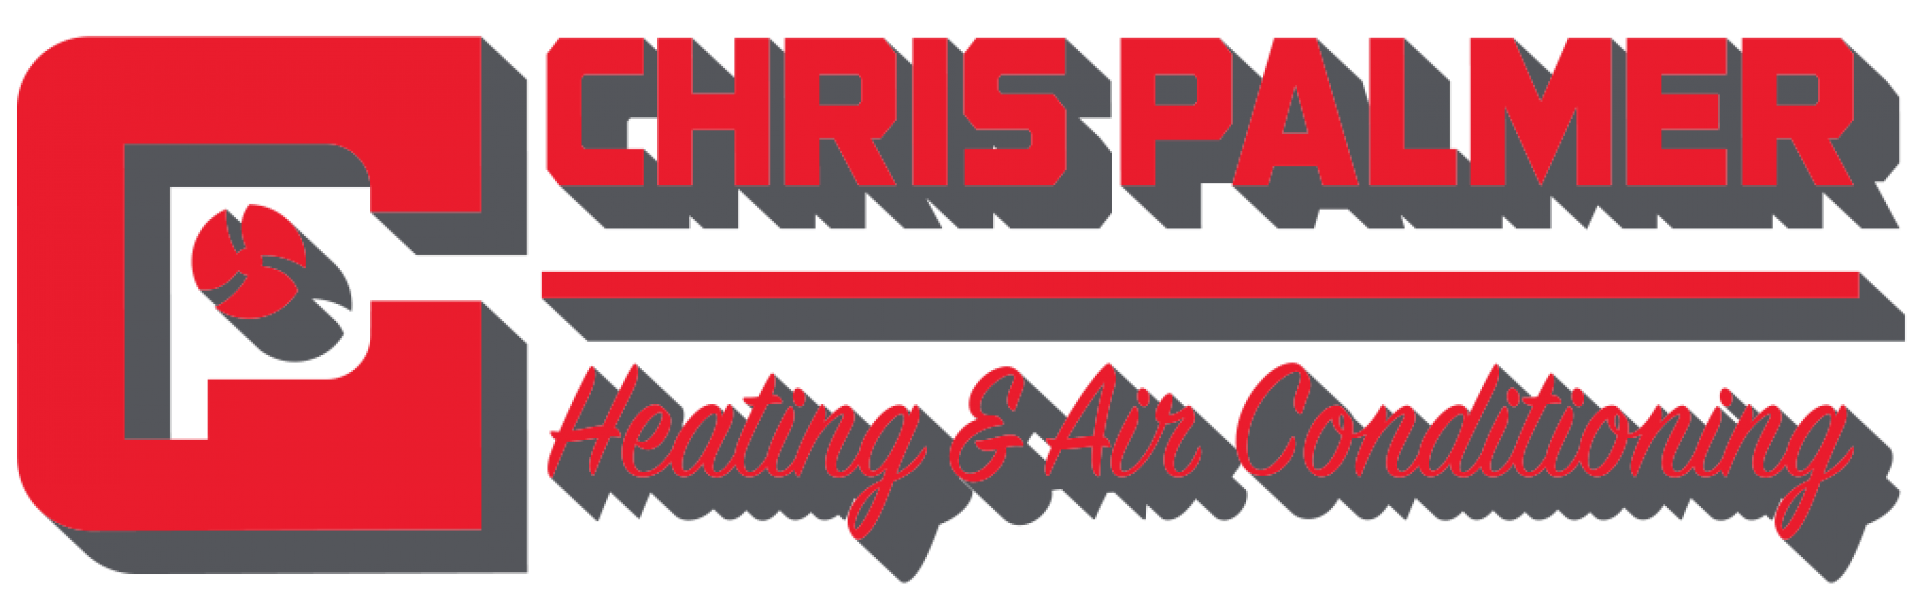 Chris Palmer Heating and Air Conditioning company logo